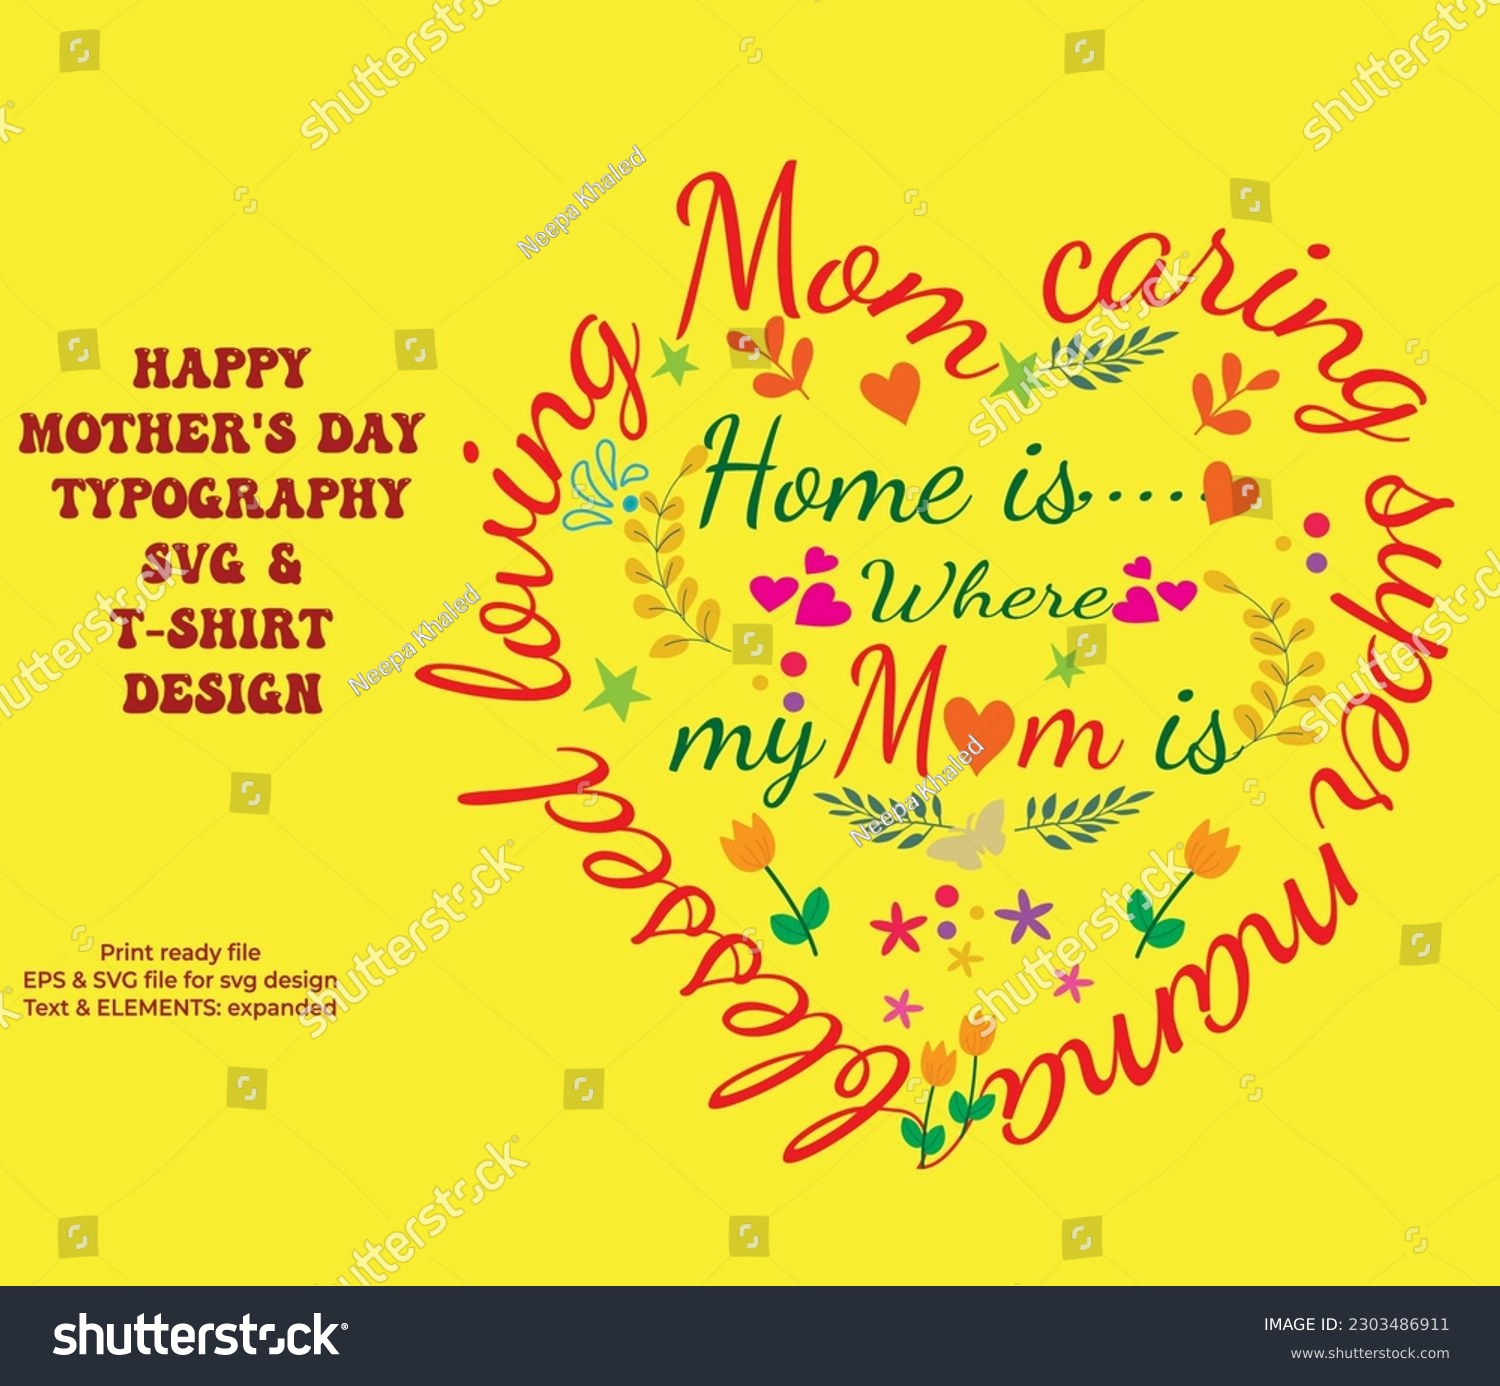 SVG of HAPPY MOTHER'S DAY TYPOGRAPHY SVG  T-SHIRT DESIGN.U CAN USE THIS IN VARIOUS ITEM AS T-SHIRTS, MUGS, MOBILES,CARDS, BABY T-SHIRTS, BABY BIBS, CAPS, CUSHION COVERS, ETC svg